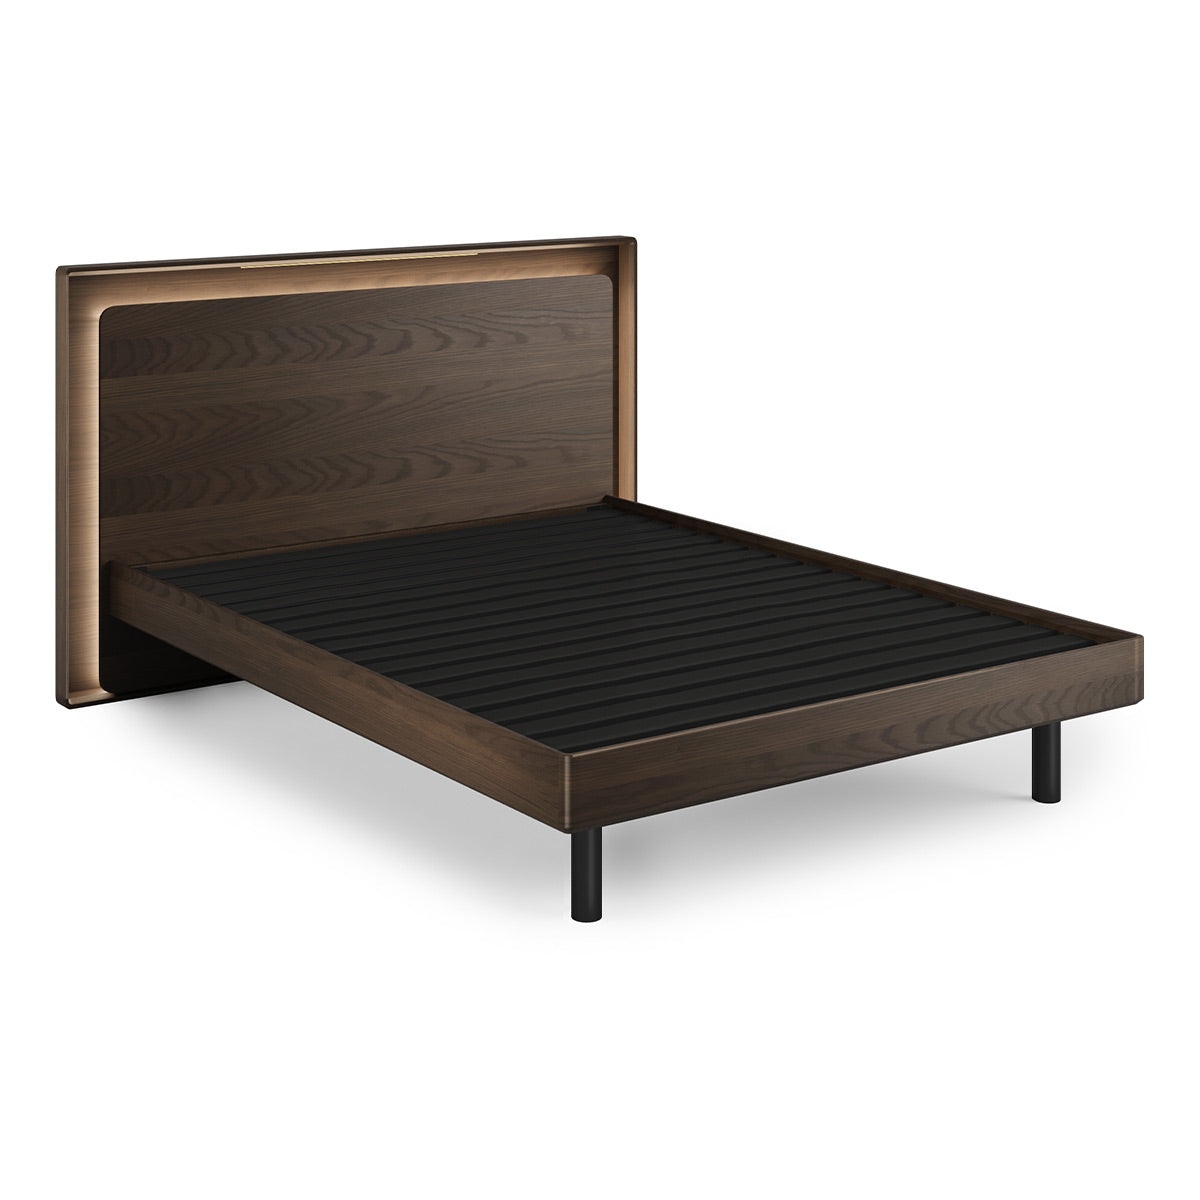 BDI Up-LINQ 9117 Queen Size Bed with Dual-Level Headboard, Dimmable Accent Lighting, and Integrated Power Stations (Toasted Oak)